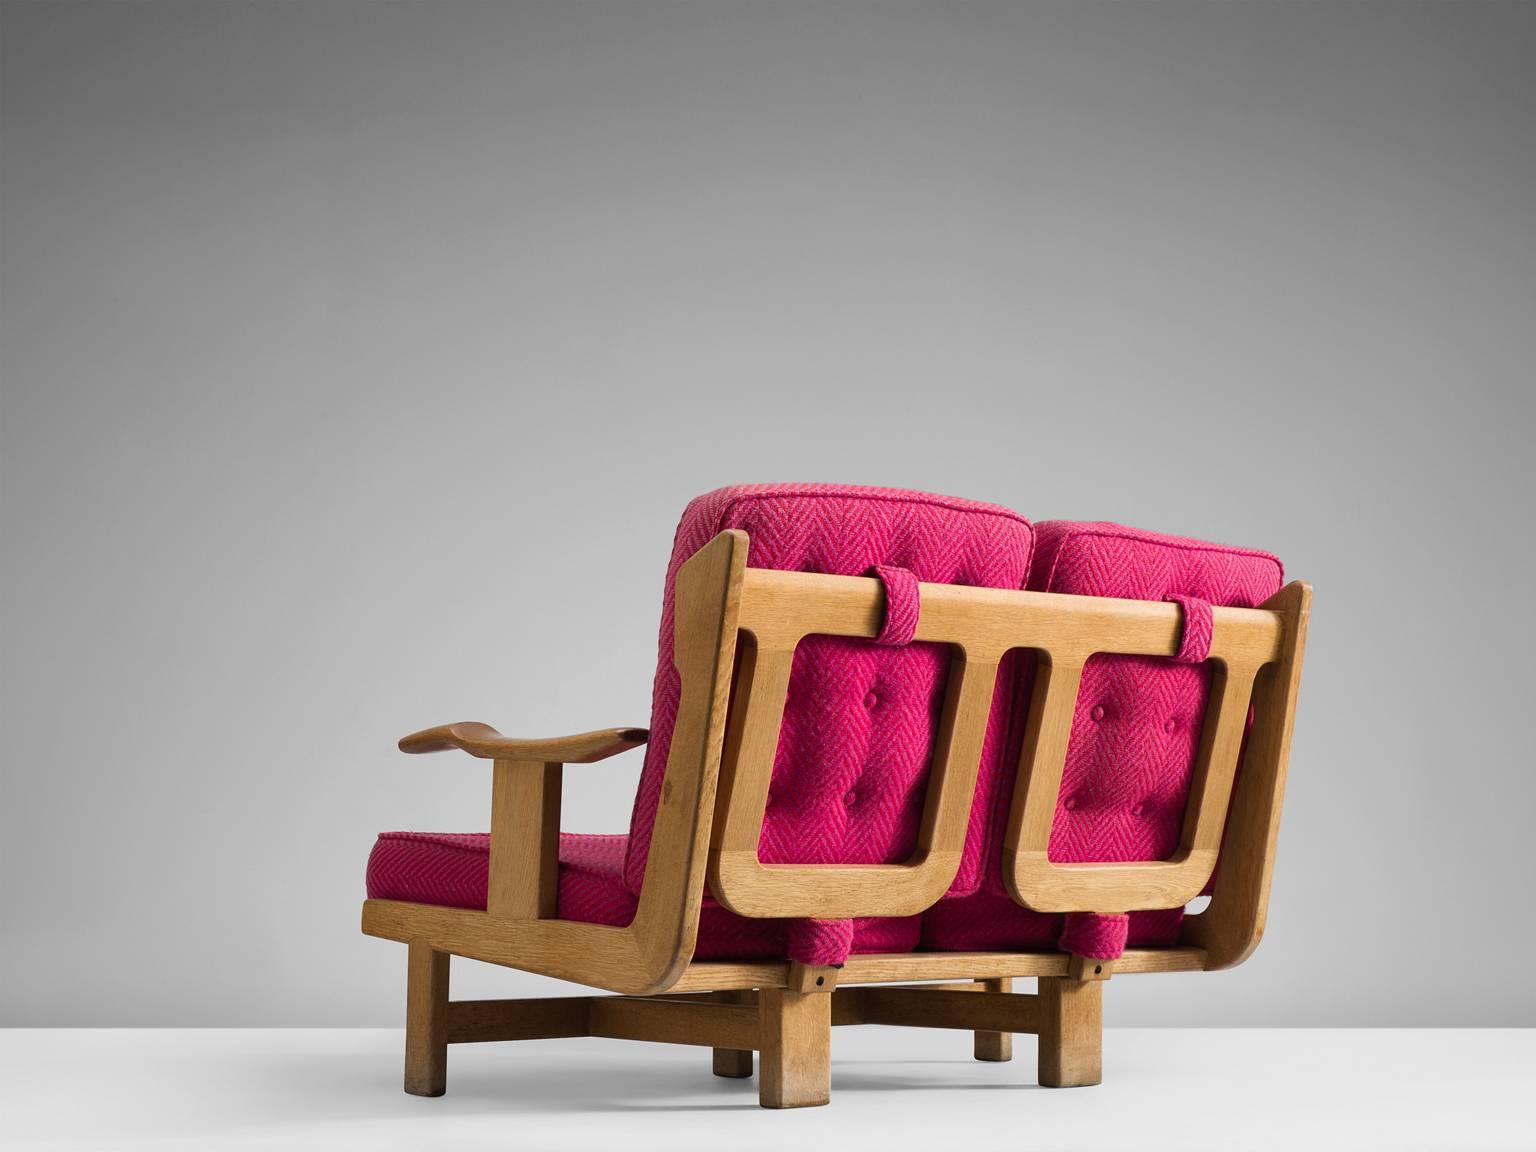 Solid two-seat Guillerme & Chambron oak sofa with pink upholstery, France, 1960s.

This sofa has a very interesting back and shows a variety of stunning shapes and well design lines, such as the armrest and the elegant bars in the back the sofa.